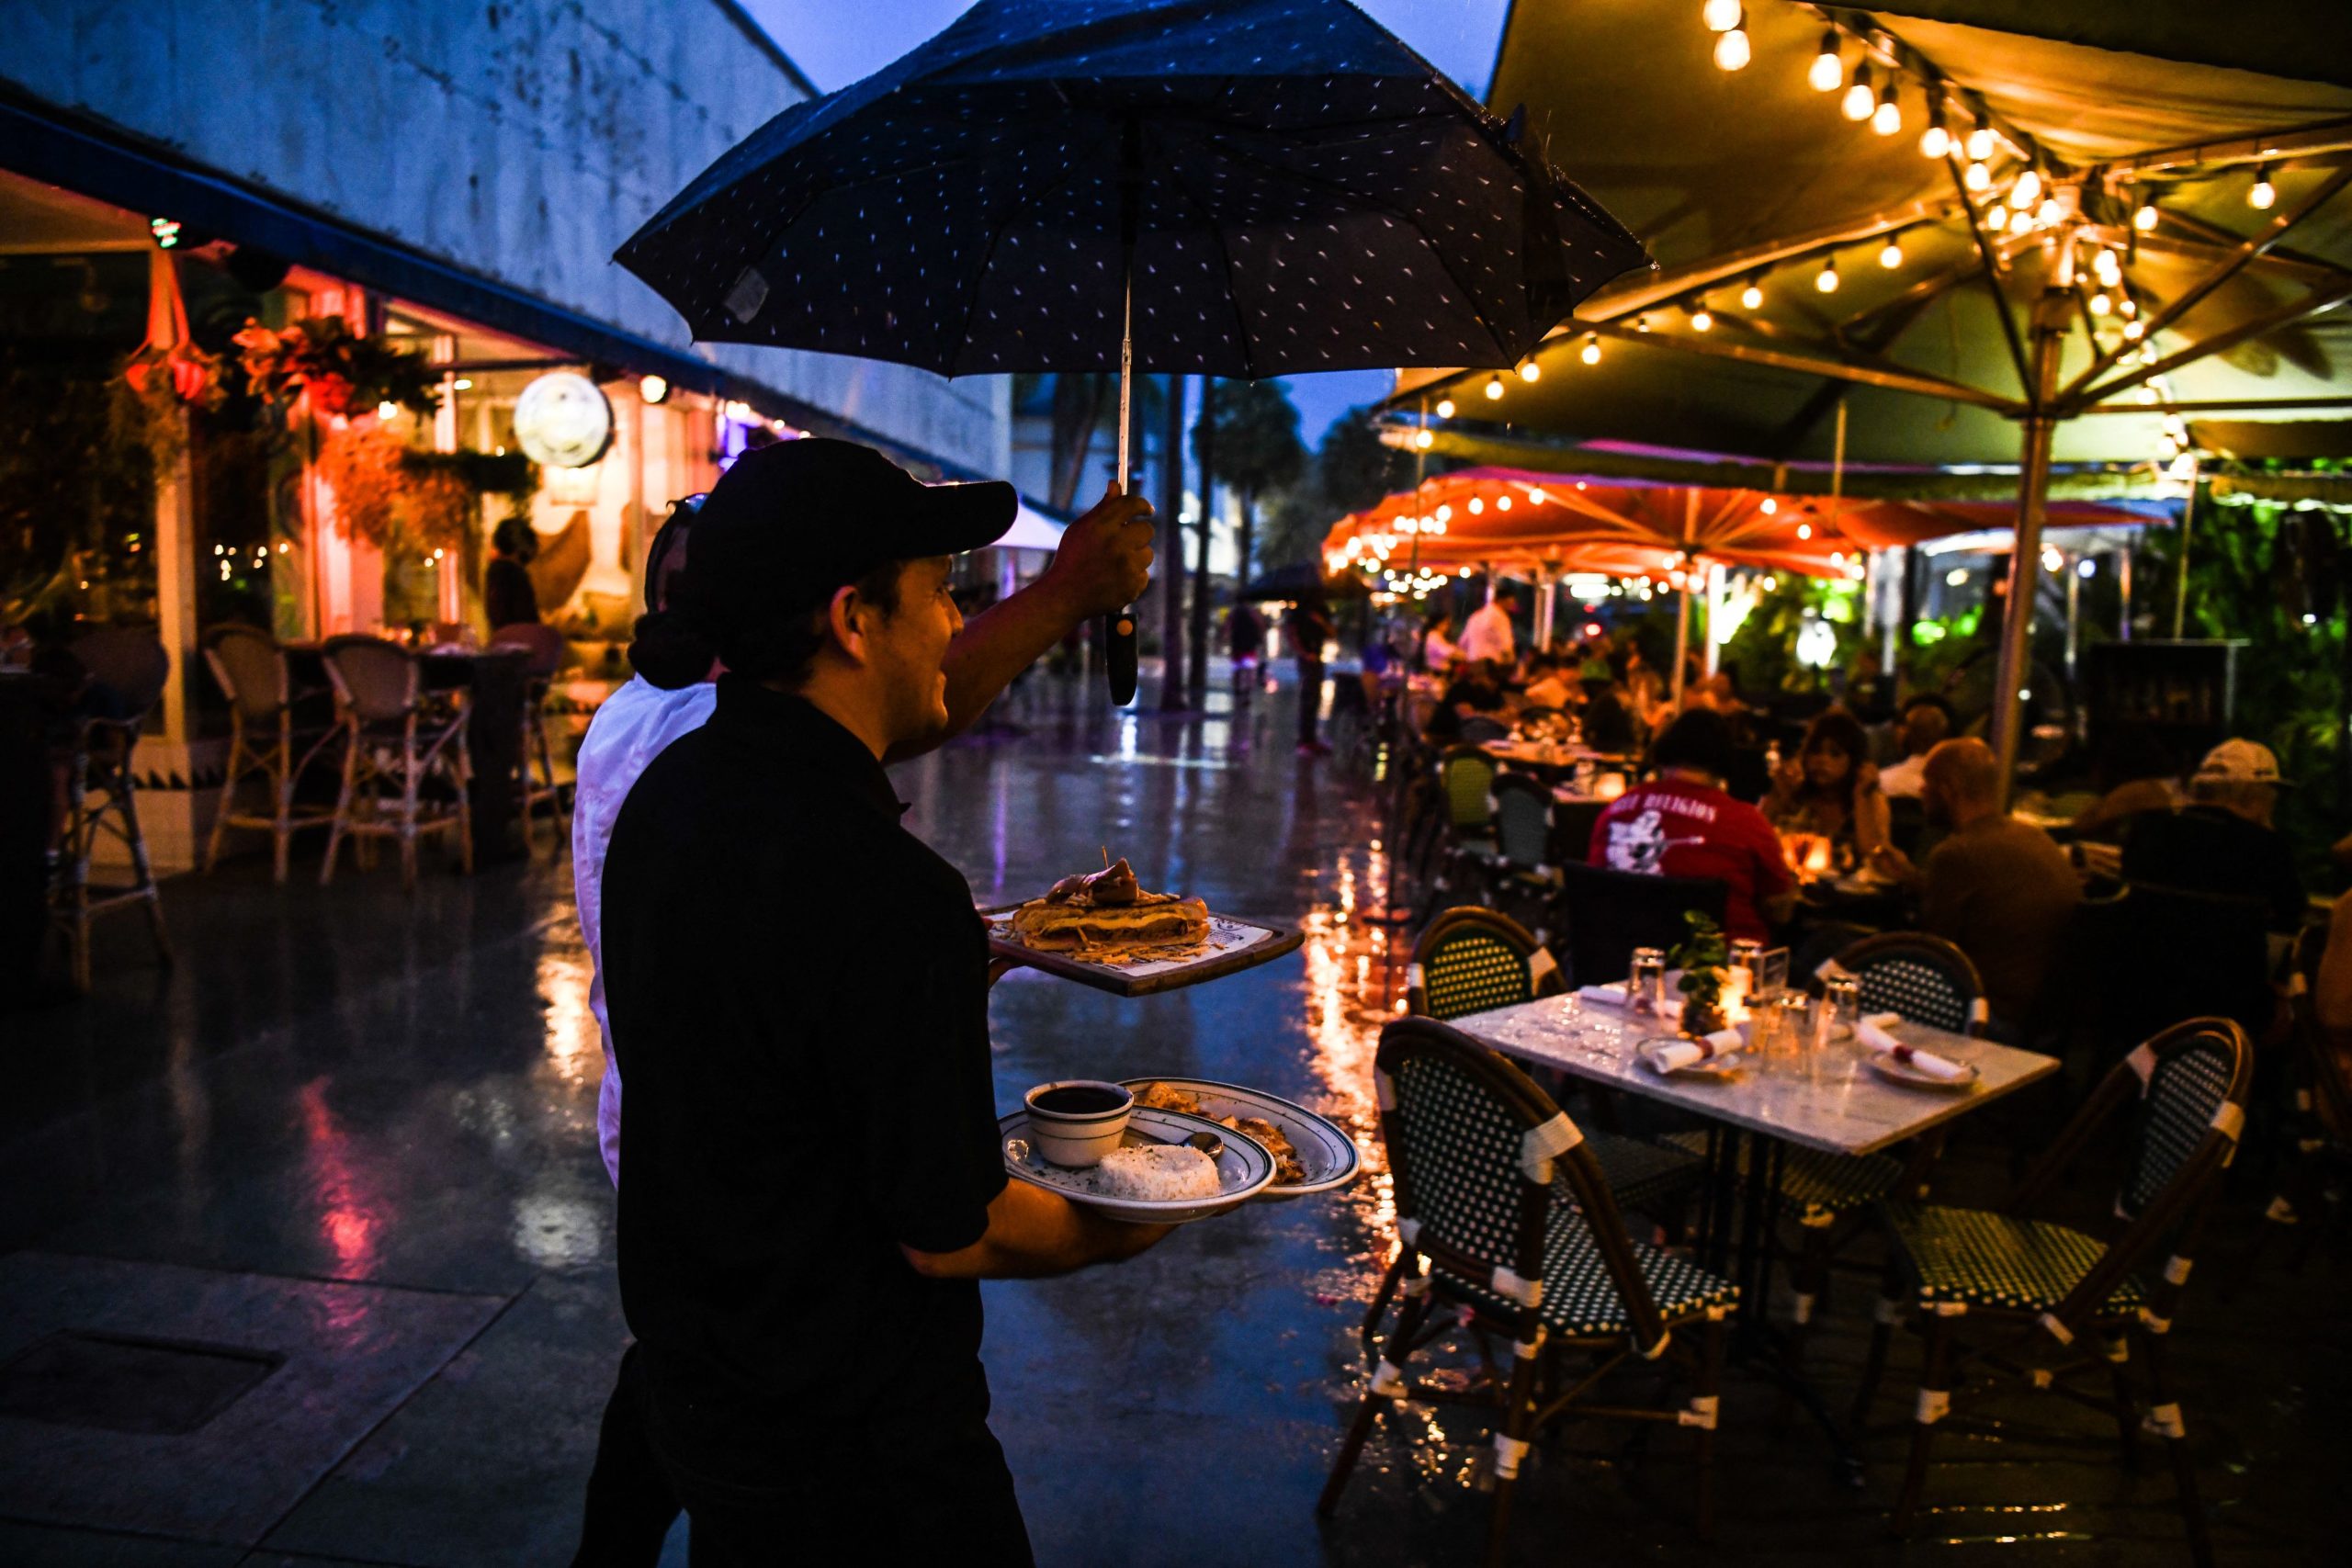 A waiter covers from rain under an umbrella as he delivers food to the table in Miami Beach, on July 27, 2021. (Photo by CHANDAN KHANNA / AFP) (Photo by CHANDAN KHANNA/AFP via Getty Images)